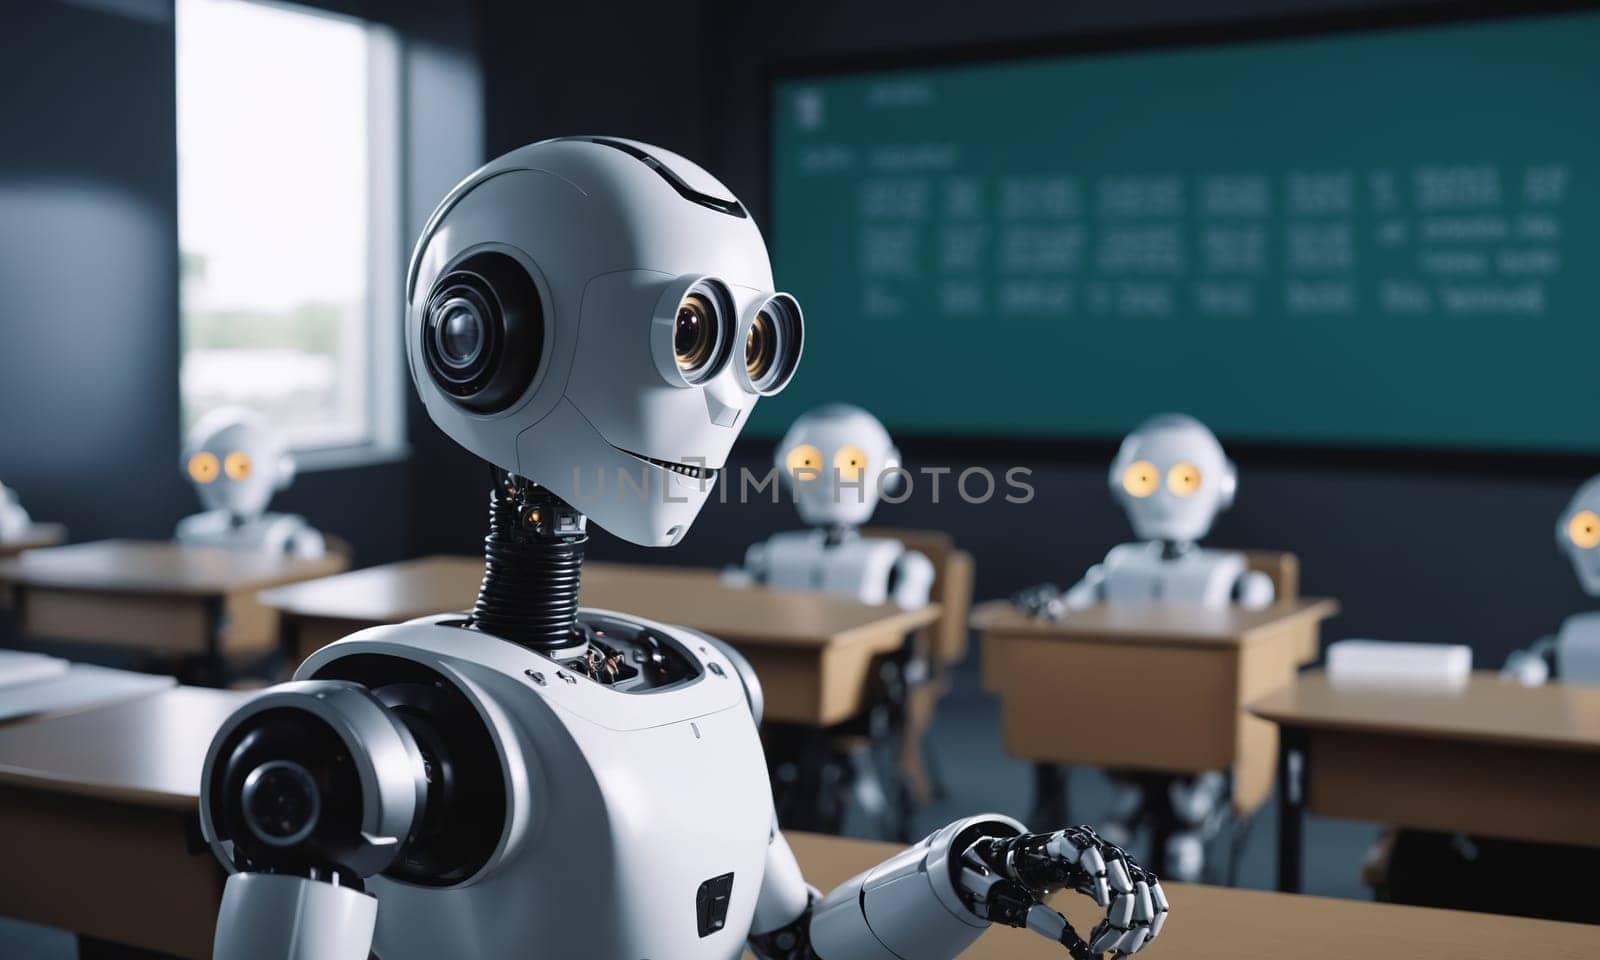 A robot is presenting in front of a classroom using Cameras optics and Electric blue lights. The Machine is discussing Engineering and Science topics with the group